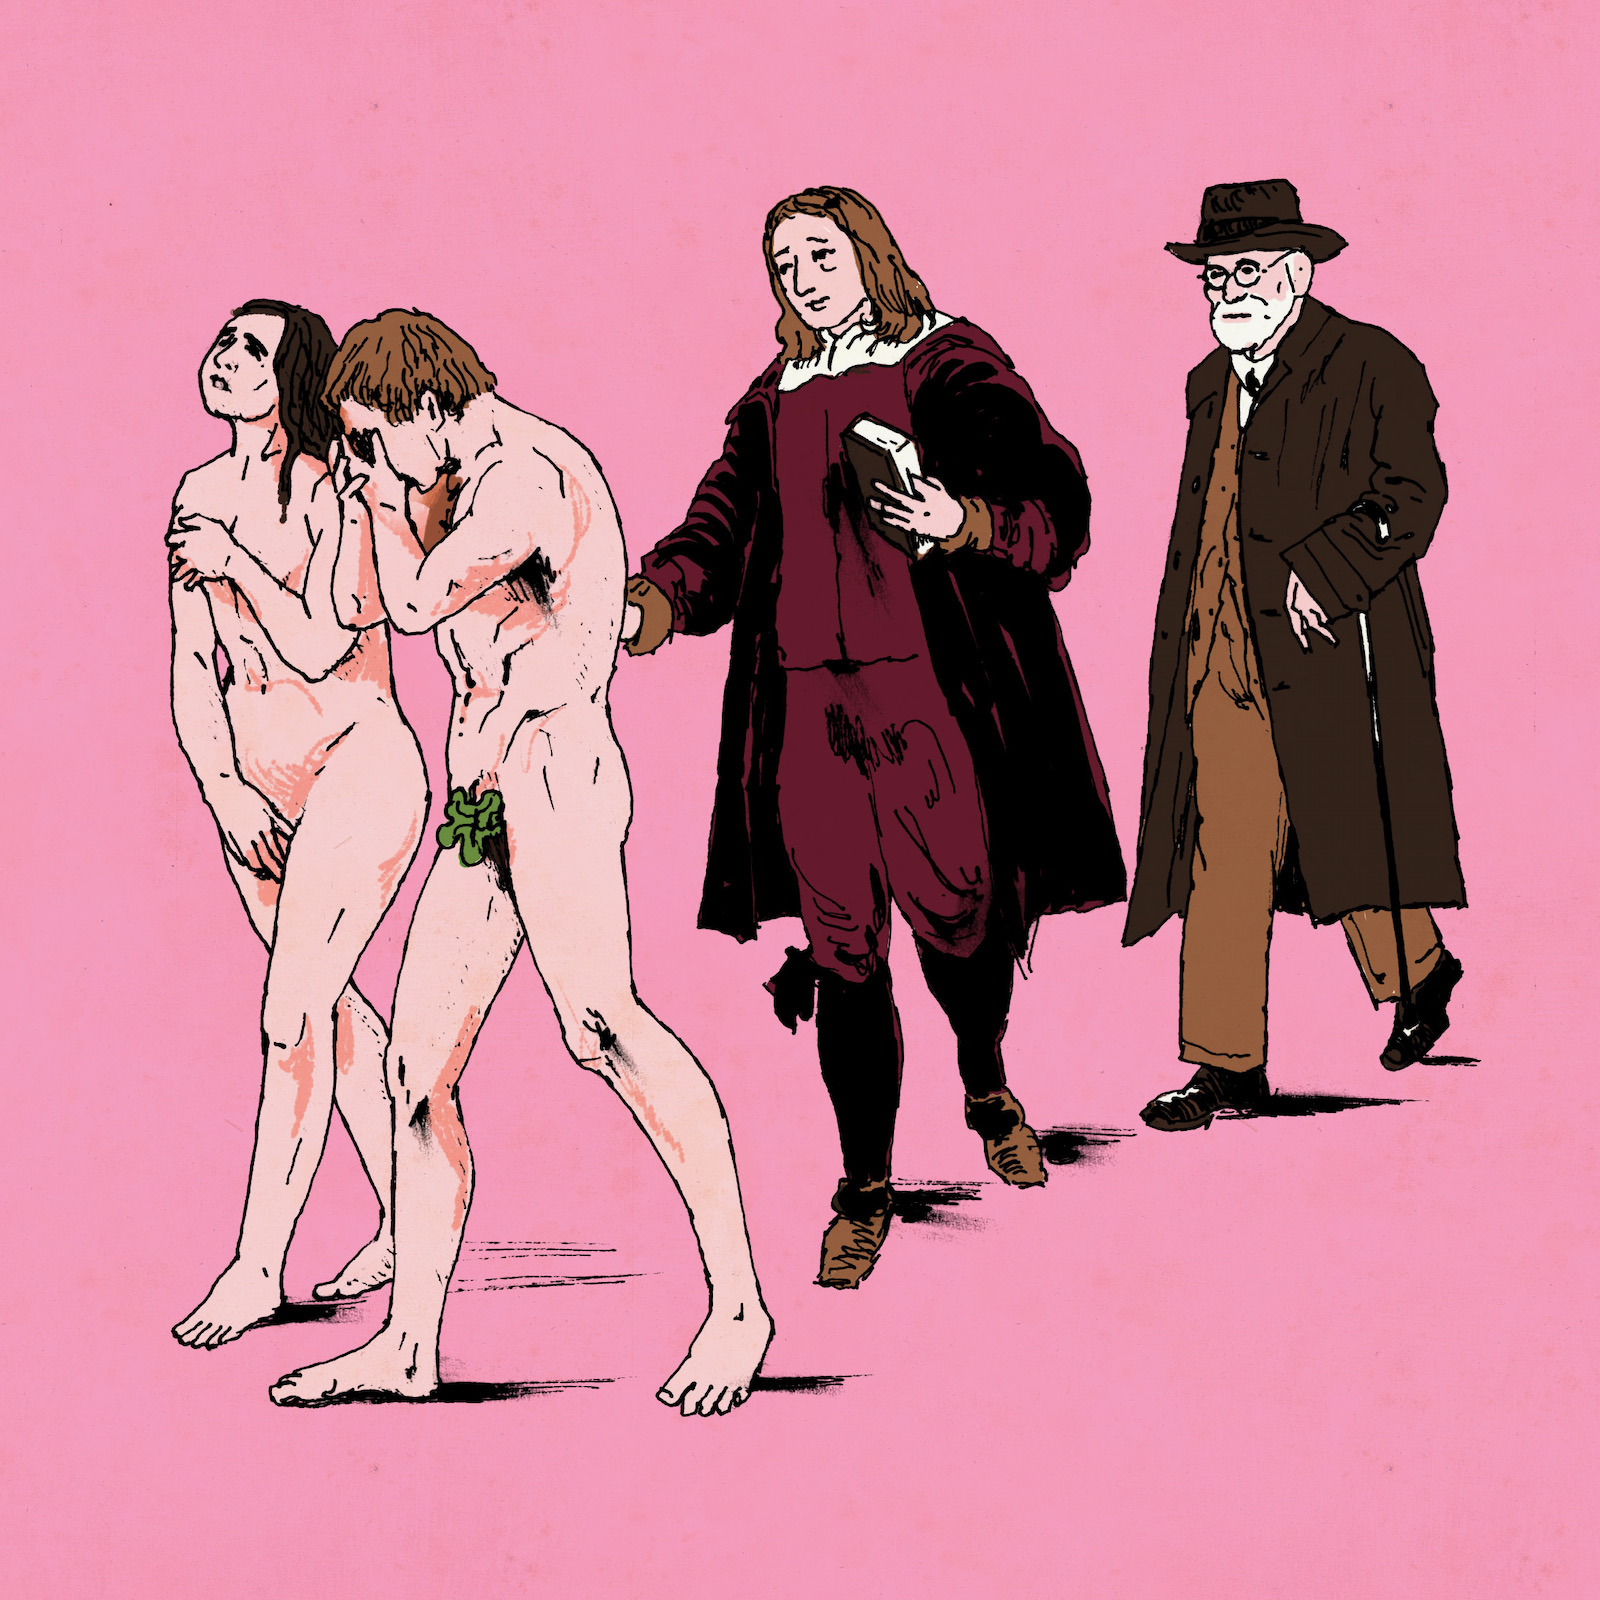 Illustration showing Milton and Freud